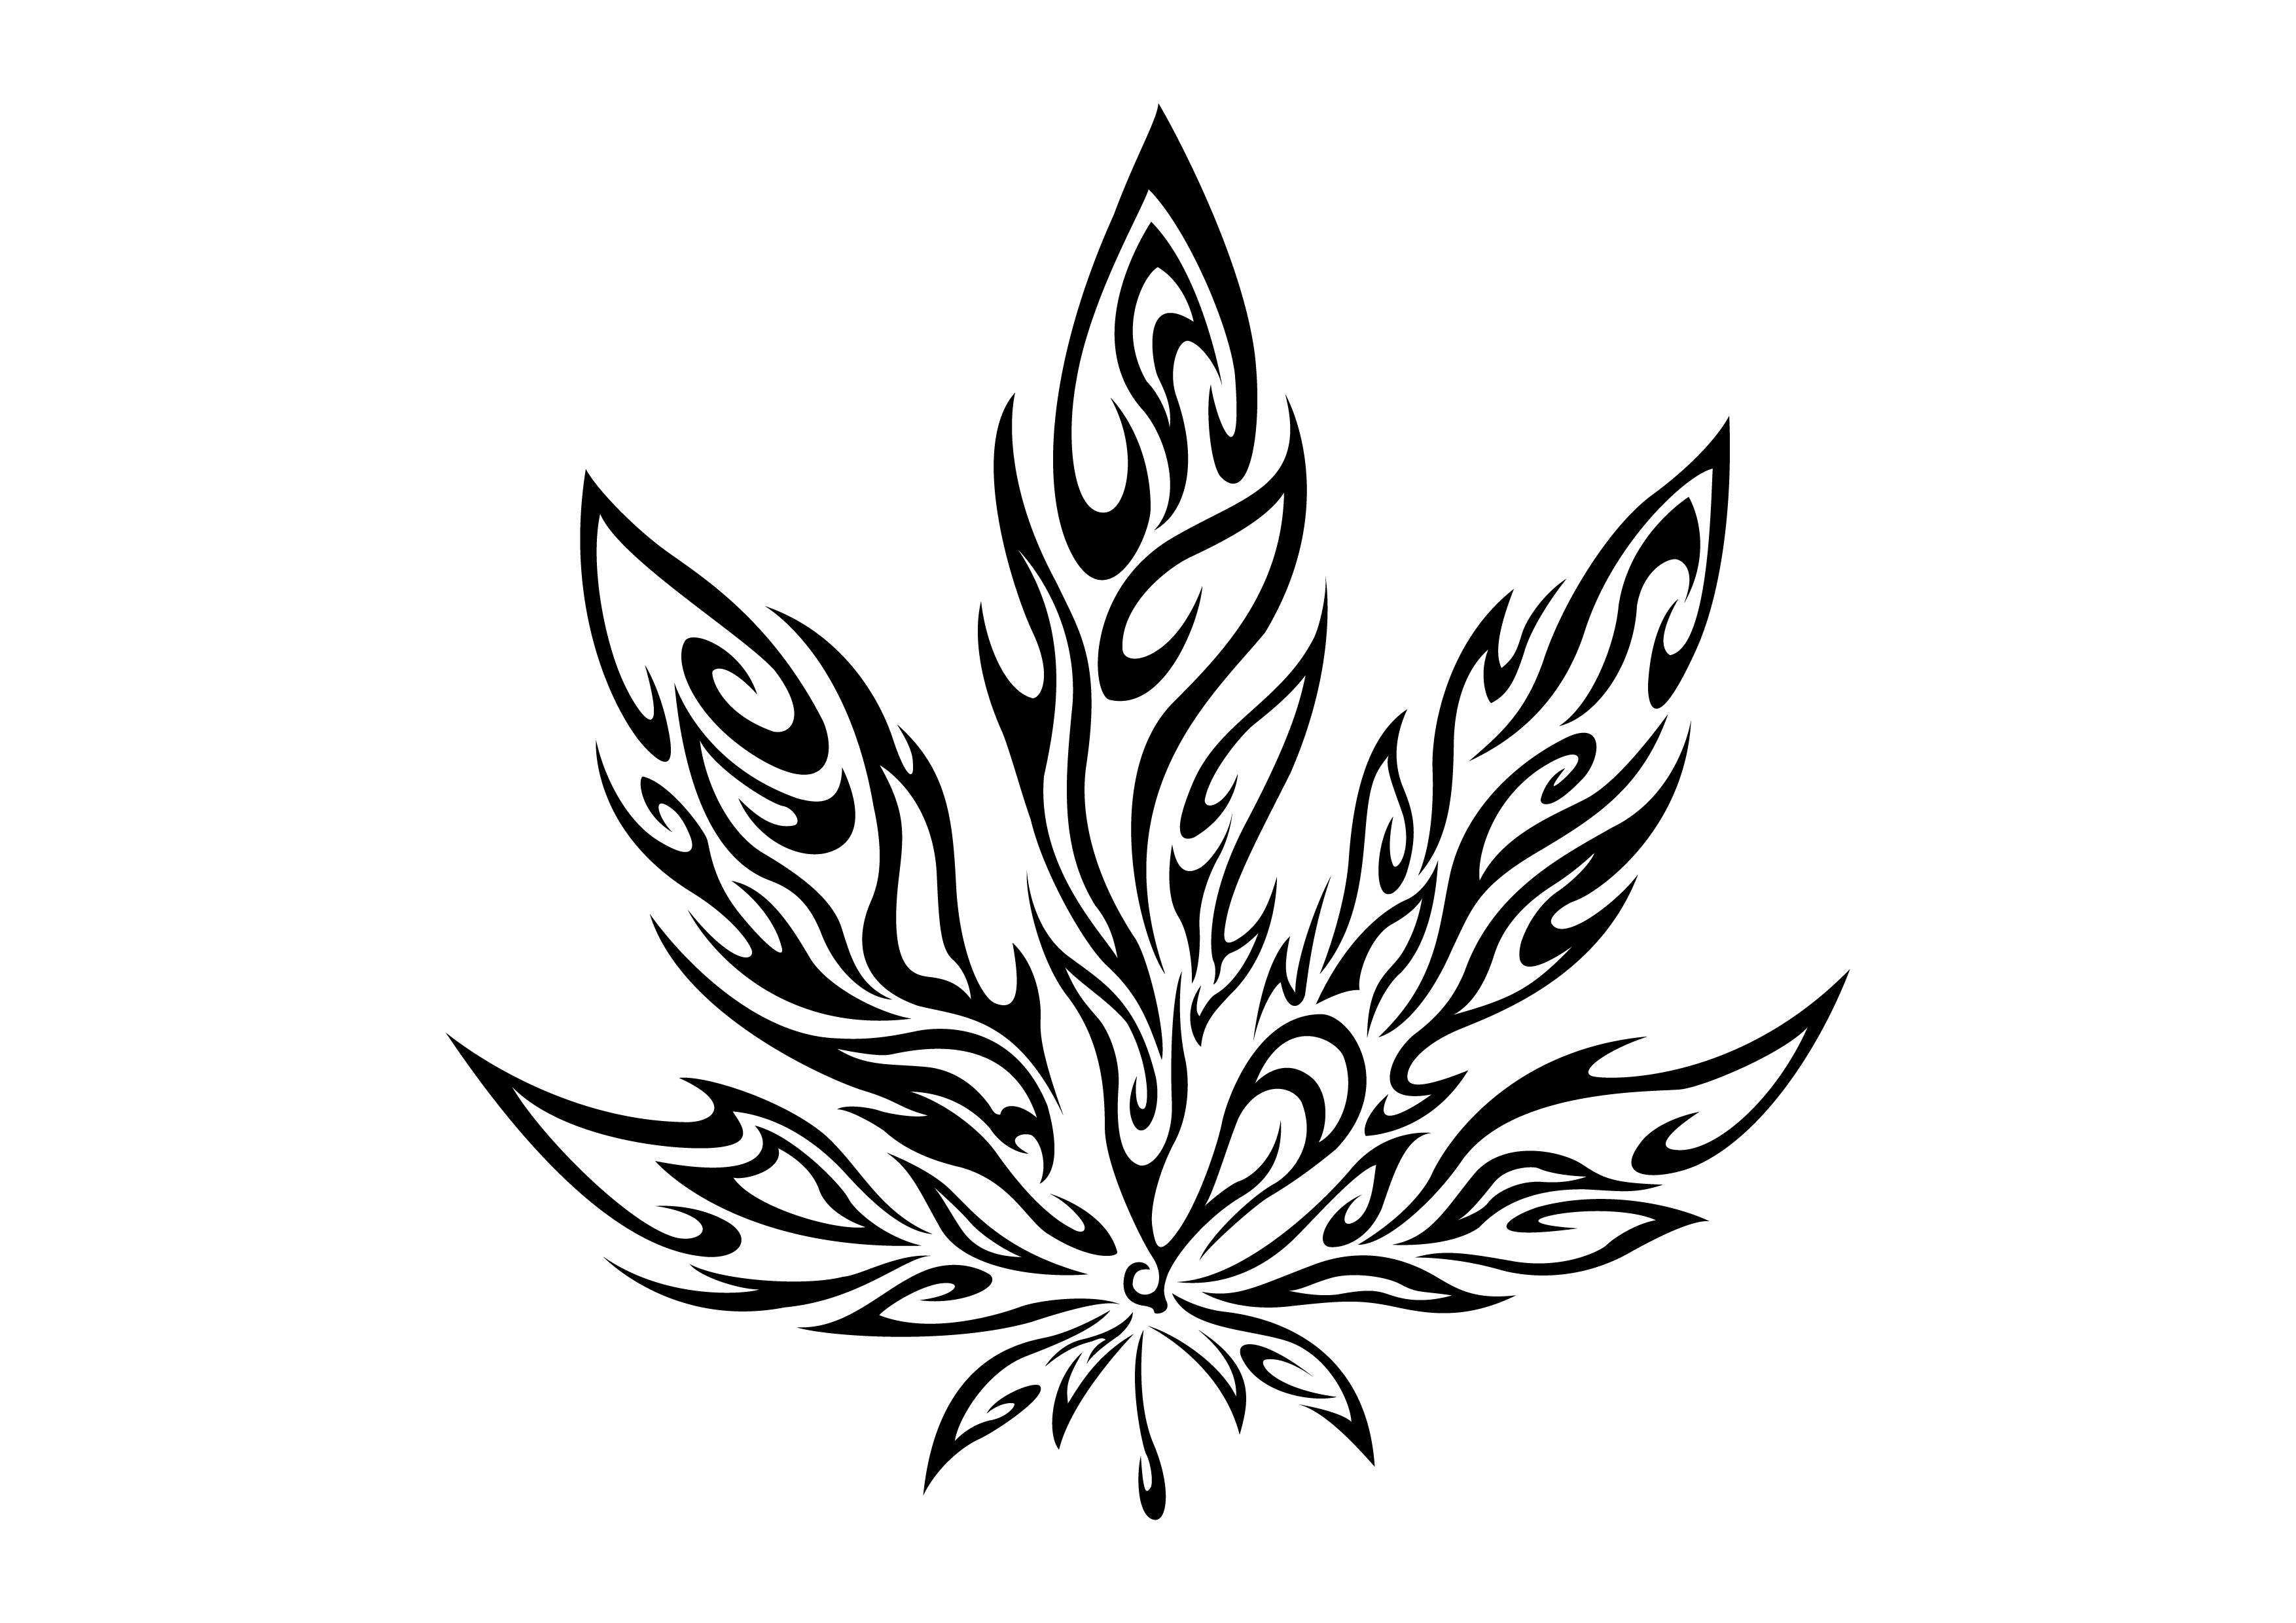 These are other Images about How to Draw a Pot Leaf Step by Step Easy for B...